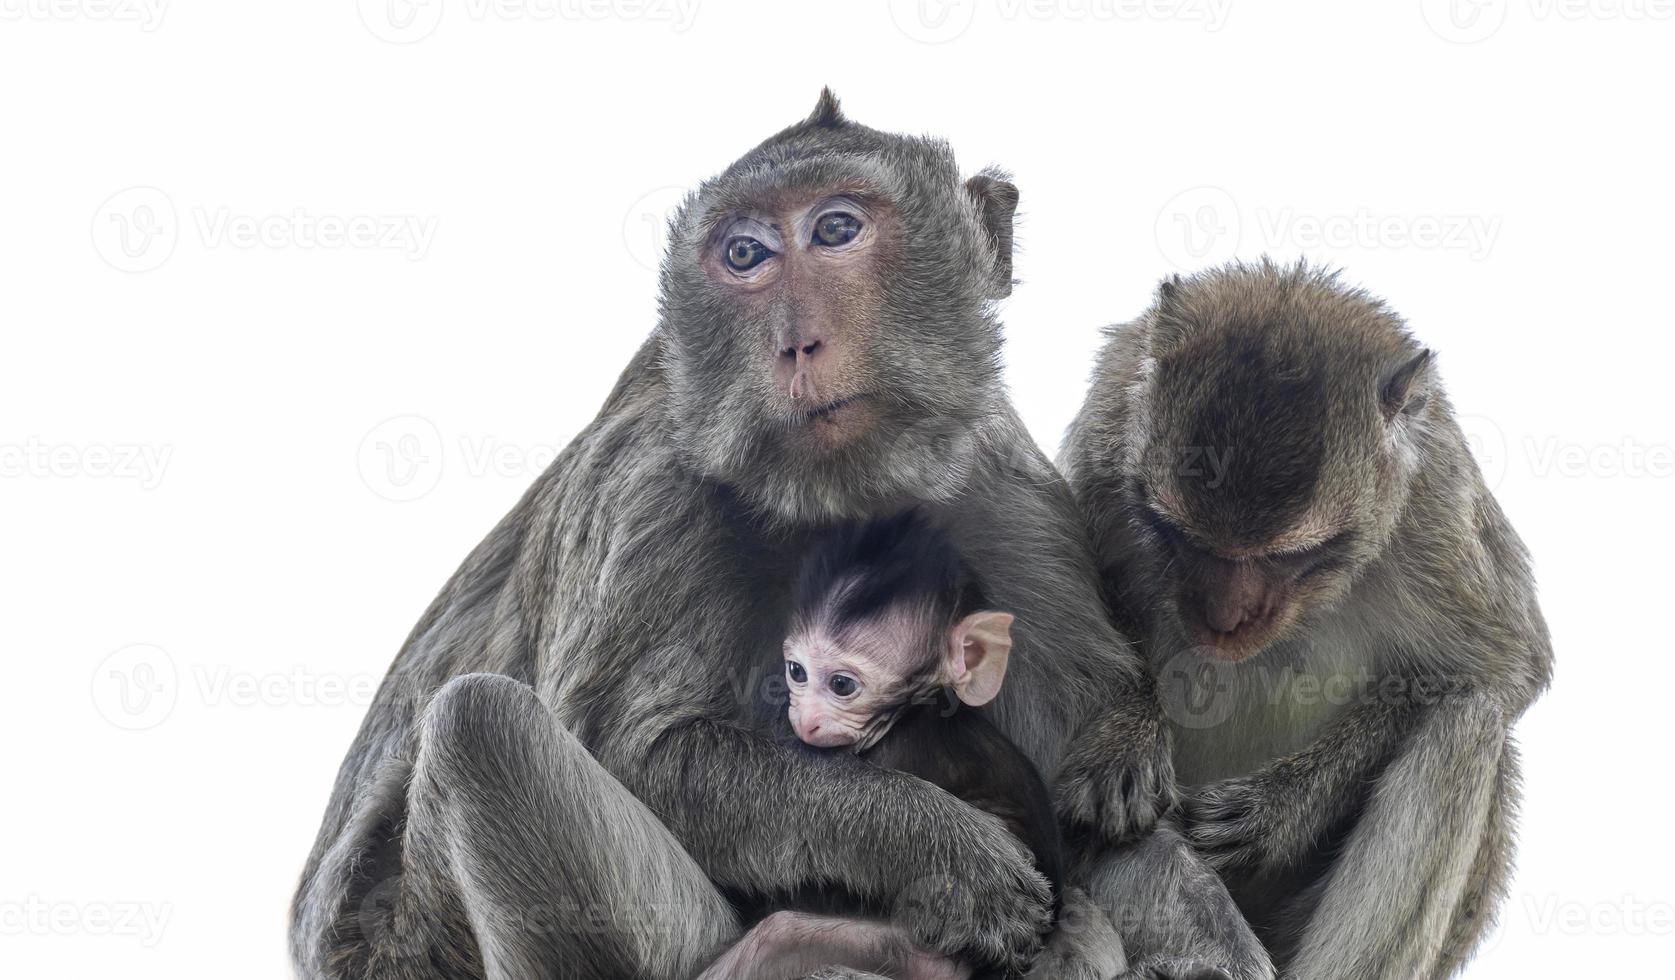 Monkey parents, monkey mothers and baby monkeys live together as a family. photo